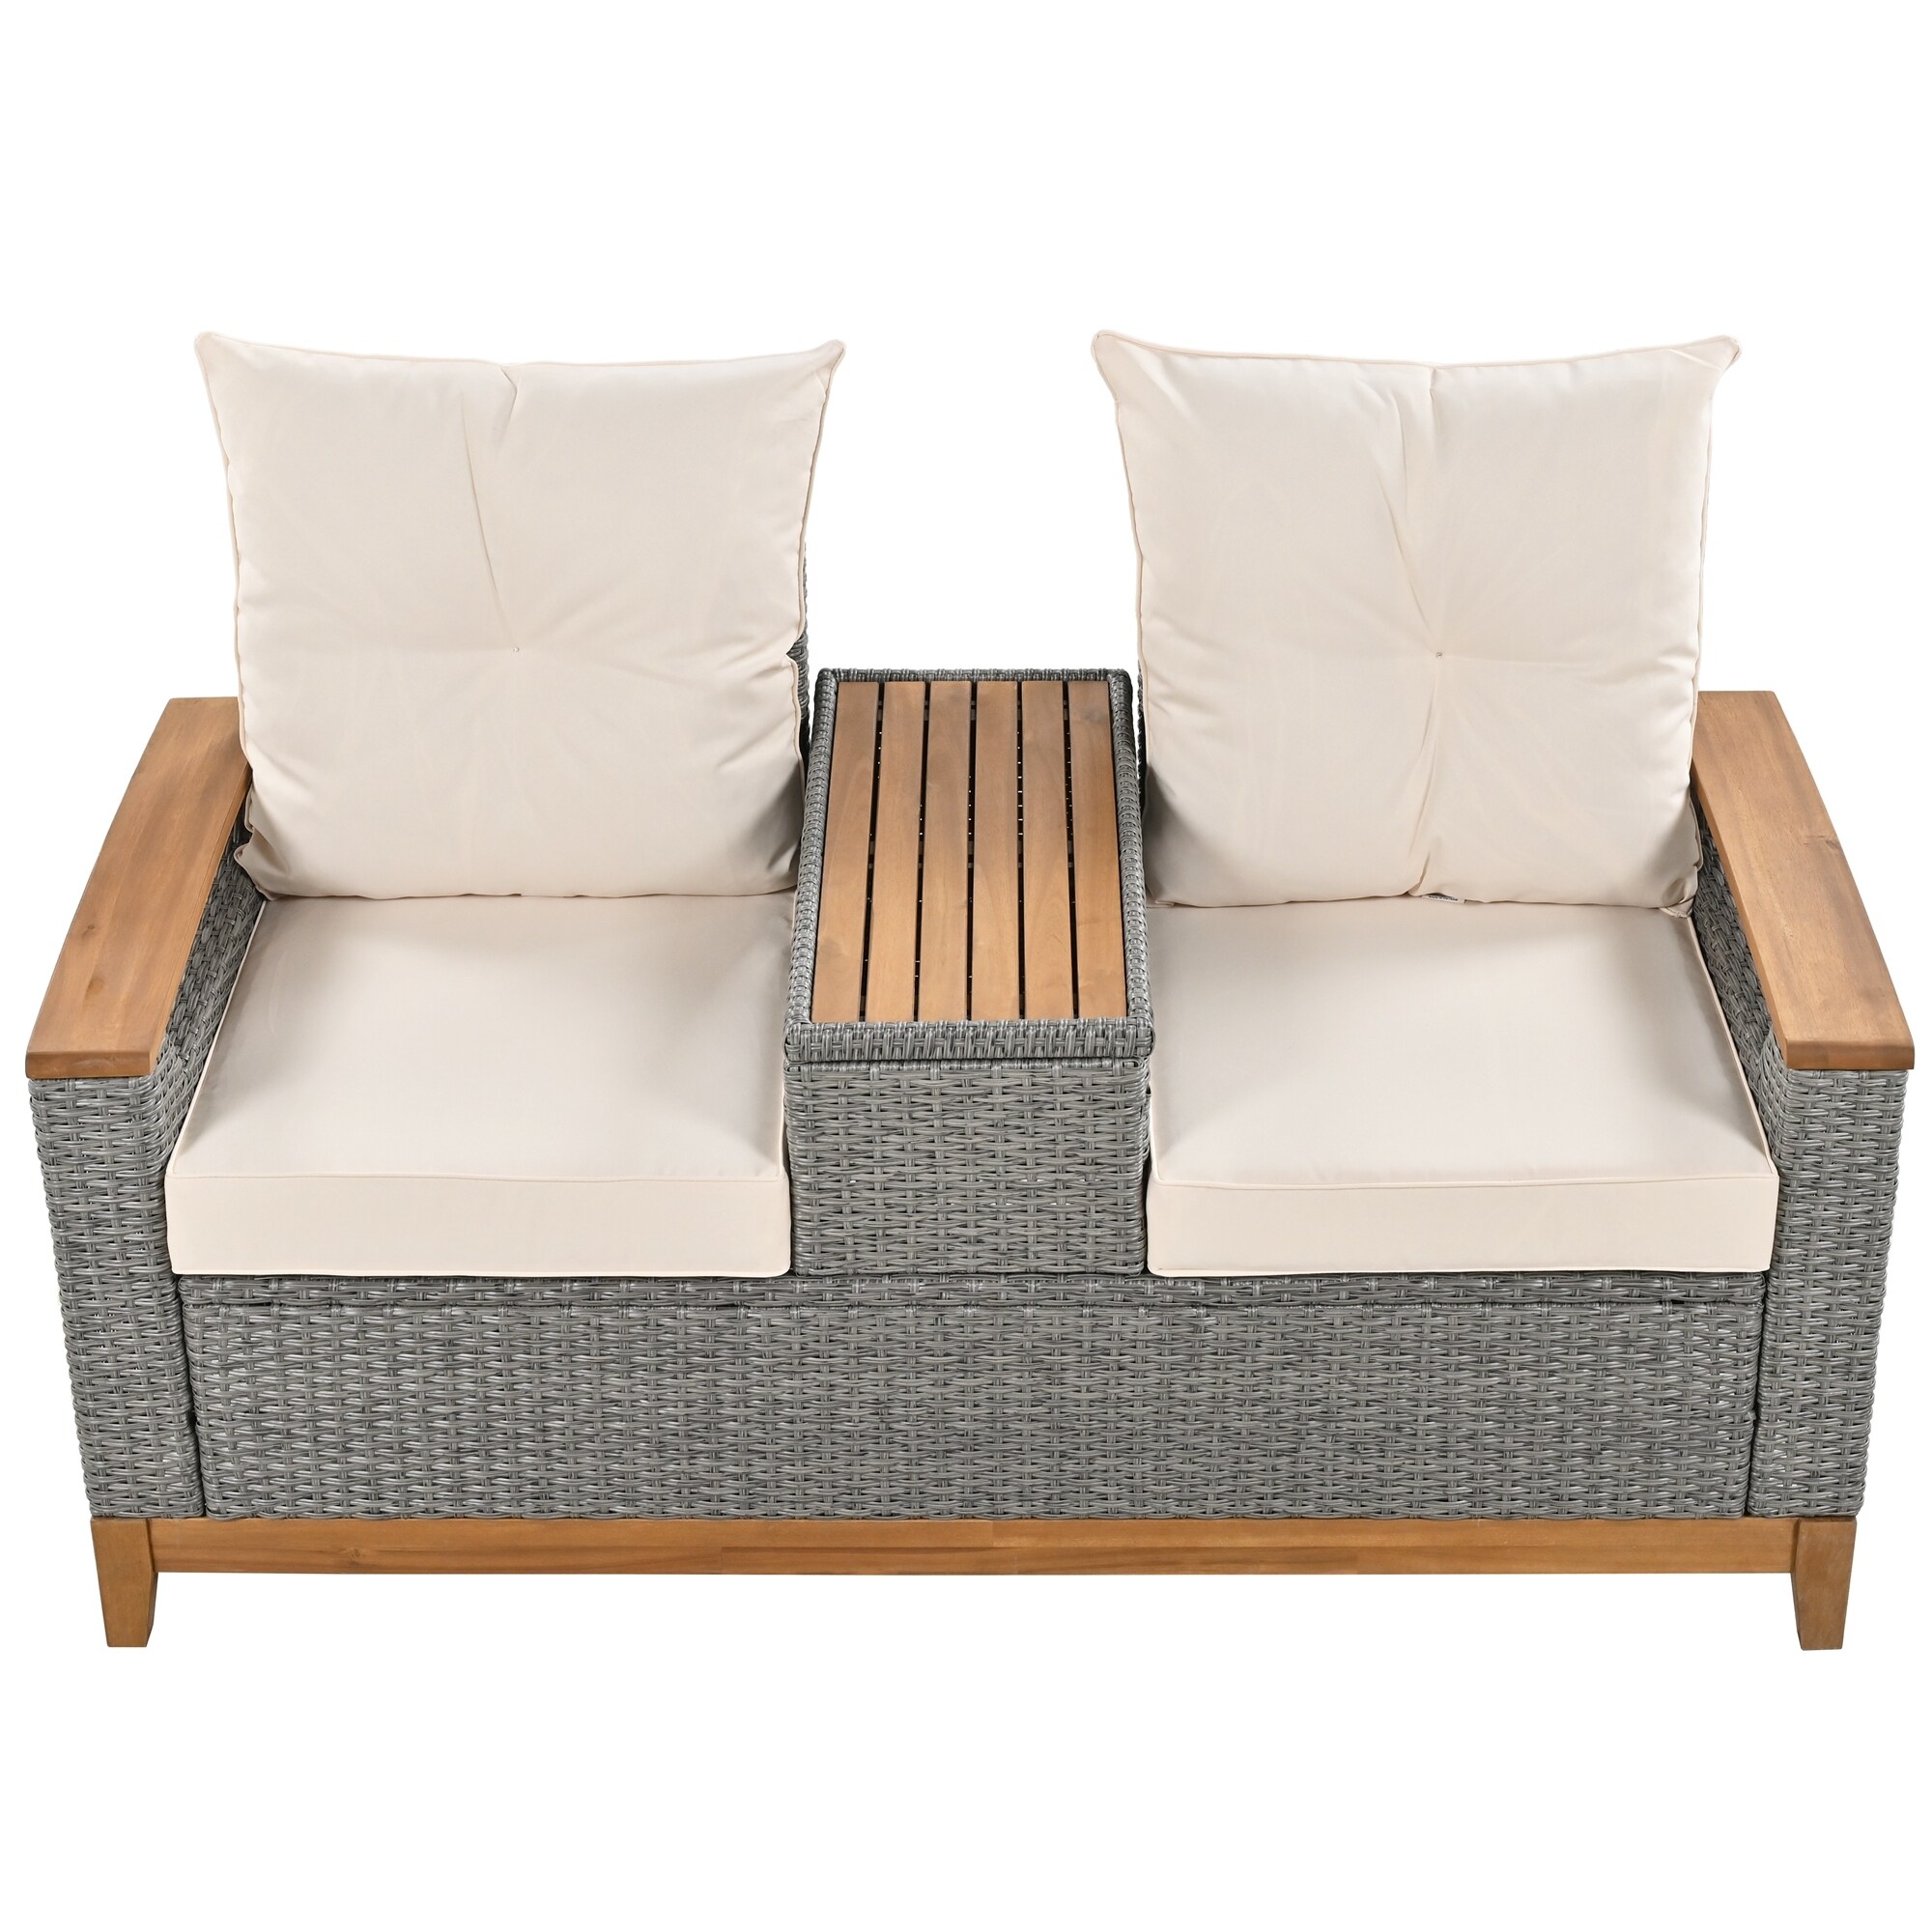 Outdoor Comfort Wood Adjustable Back Loveseat  Armrest With Storage Space For Courtyards  Swimming Pools And Balconies